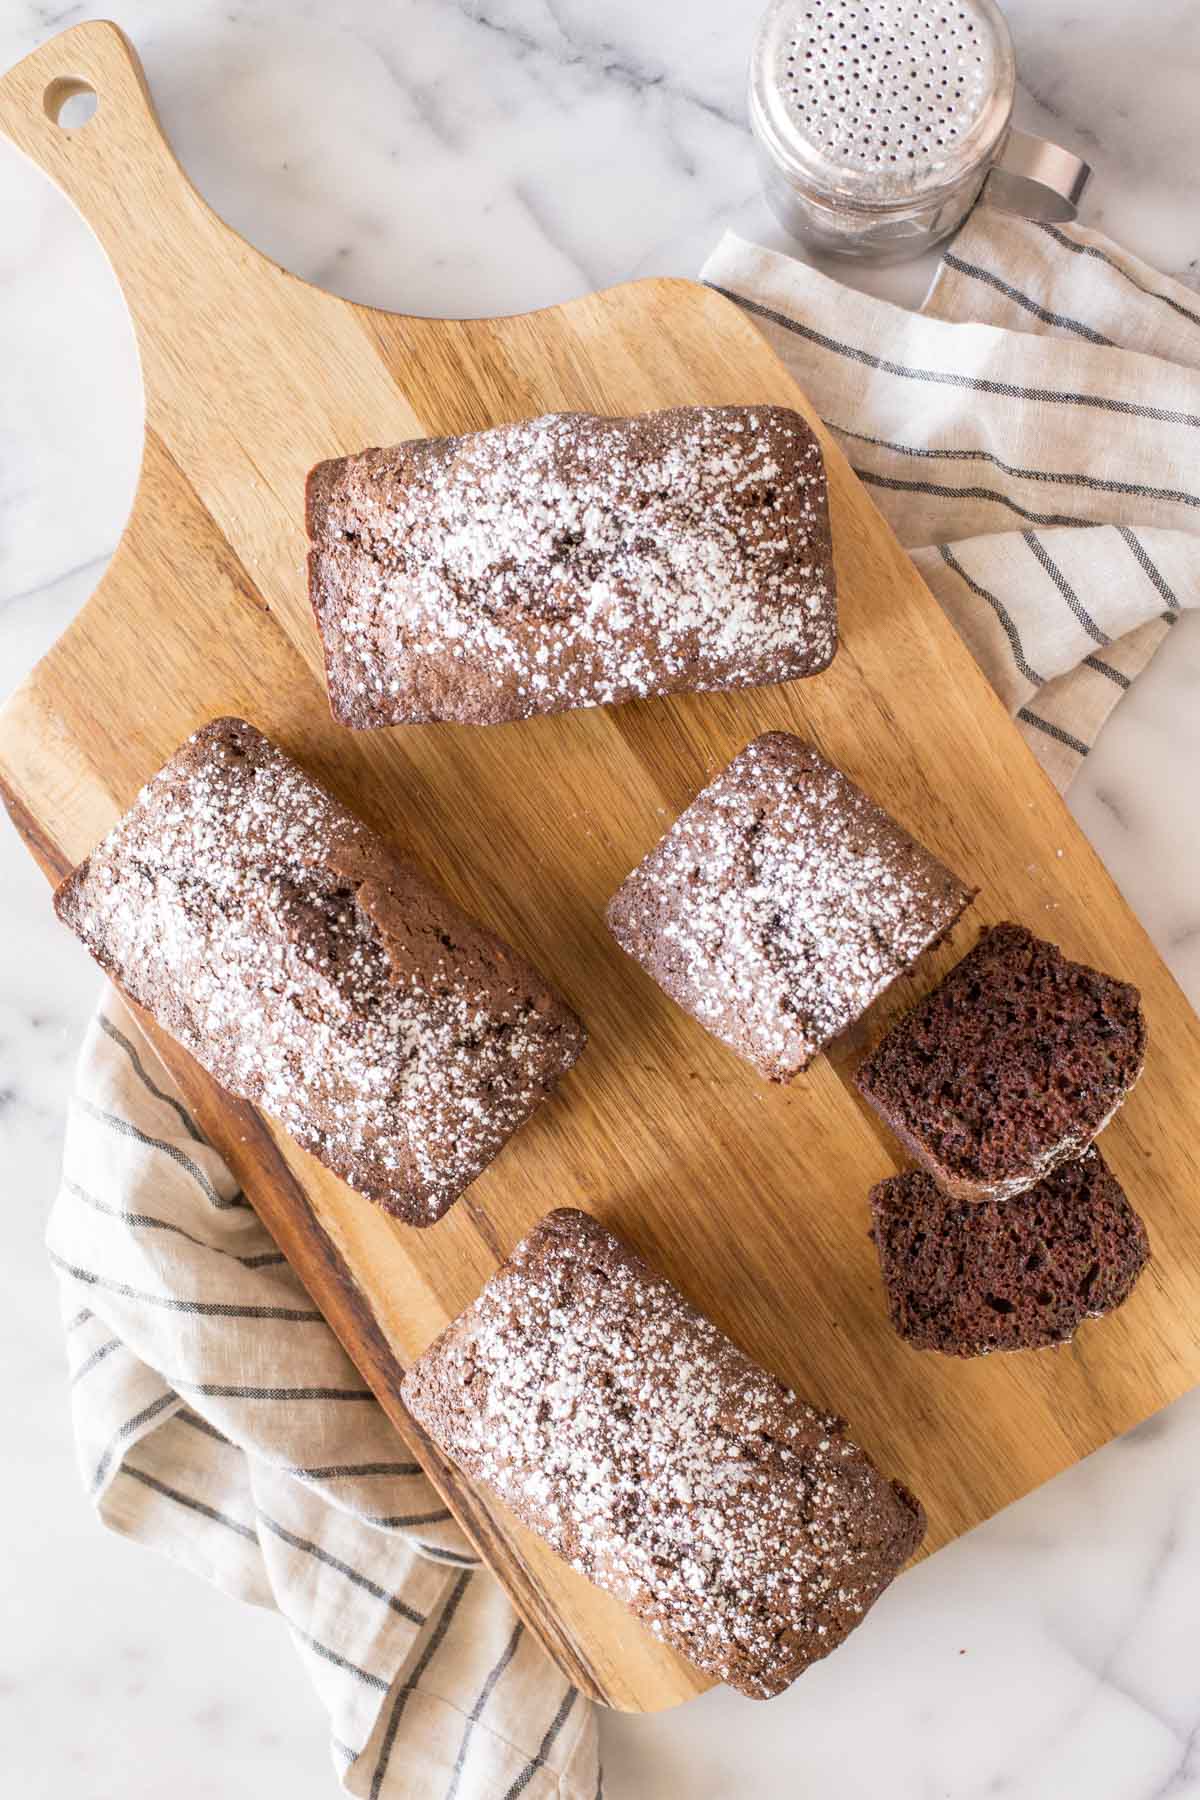 Overhead view of Chocolate Zucchini Bread dusted with powdered sugar on a wooden cutting board. 